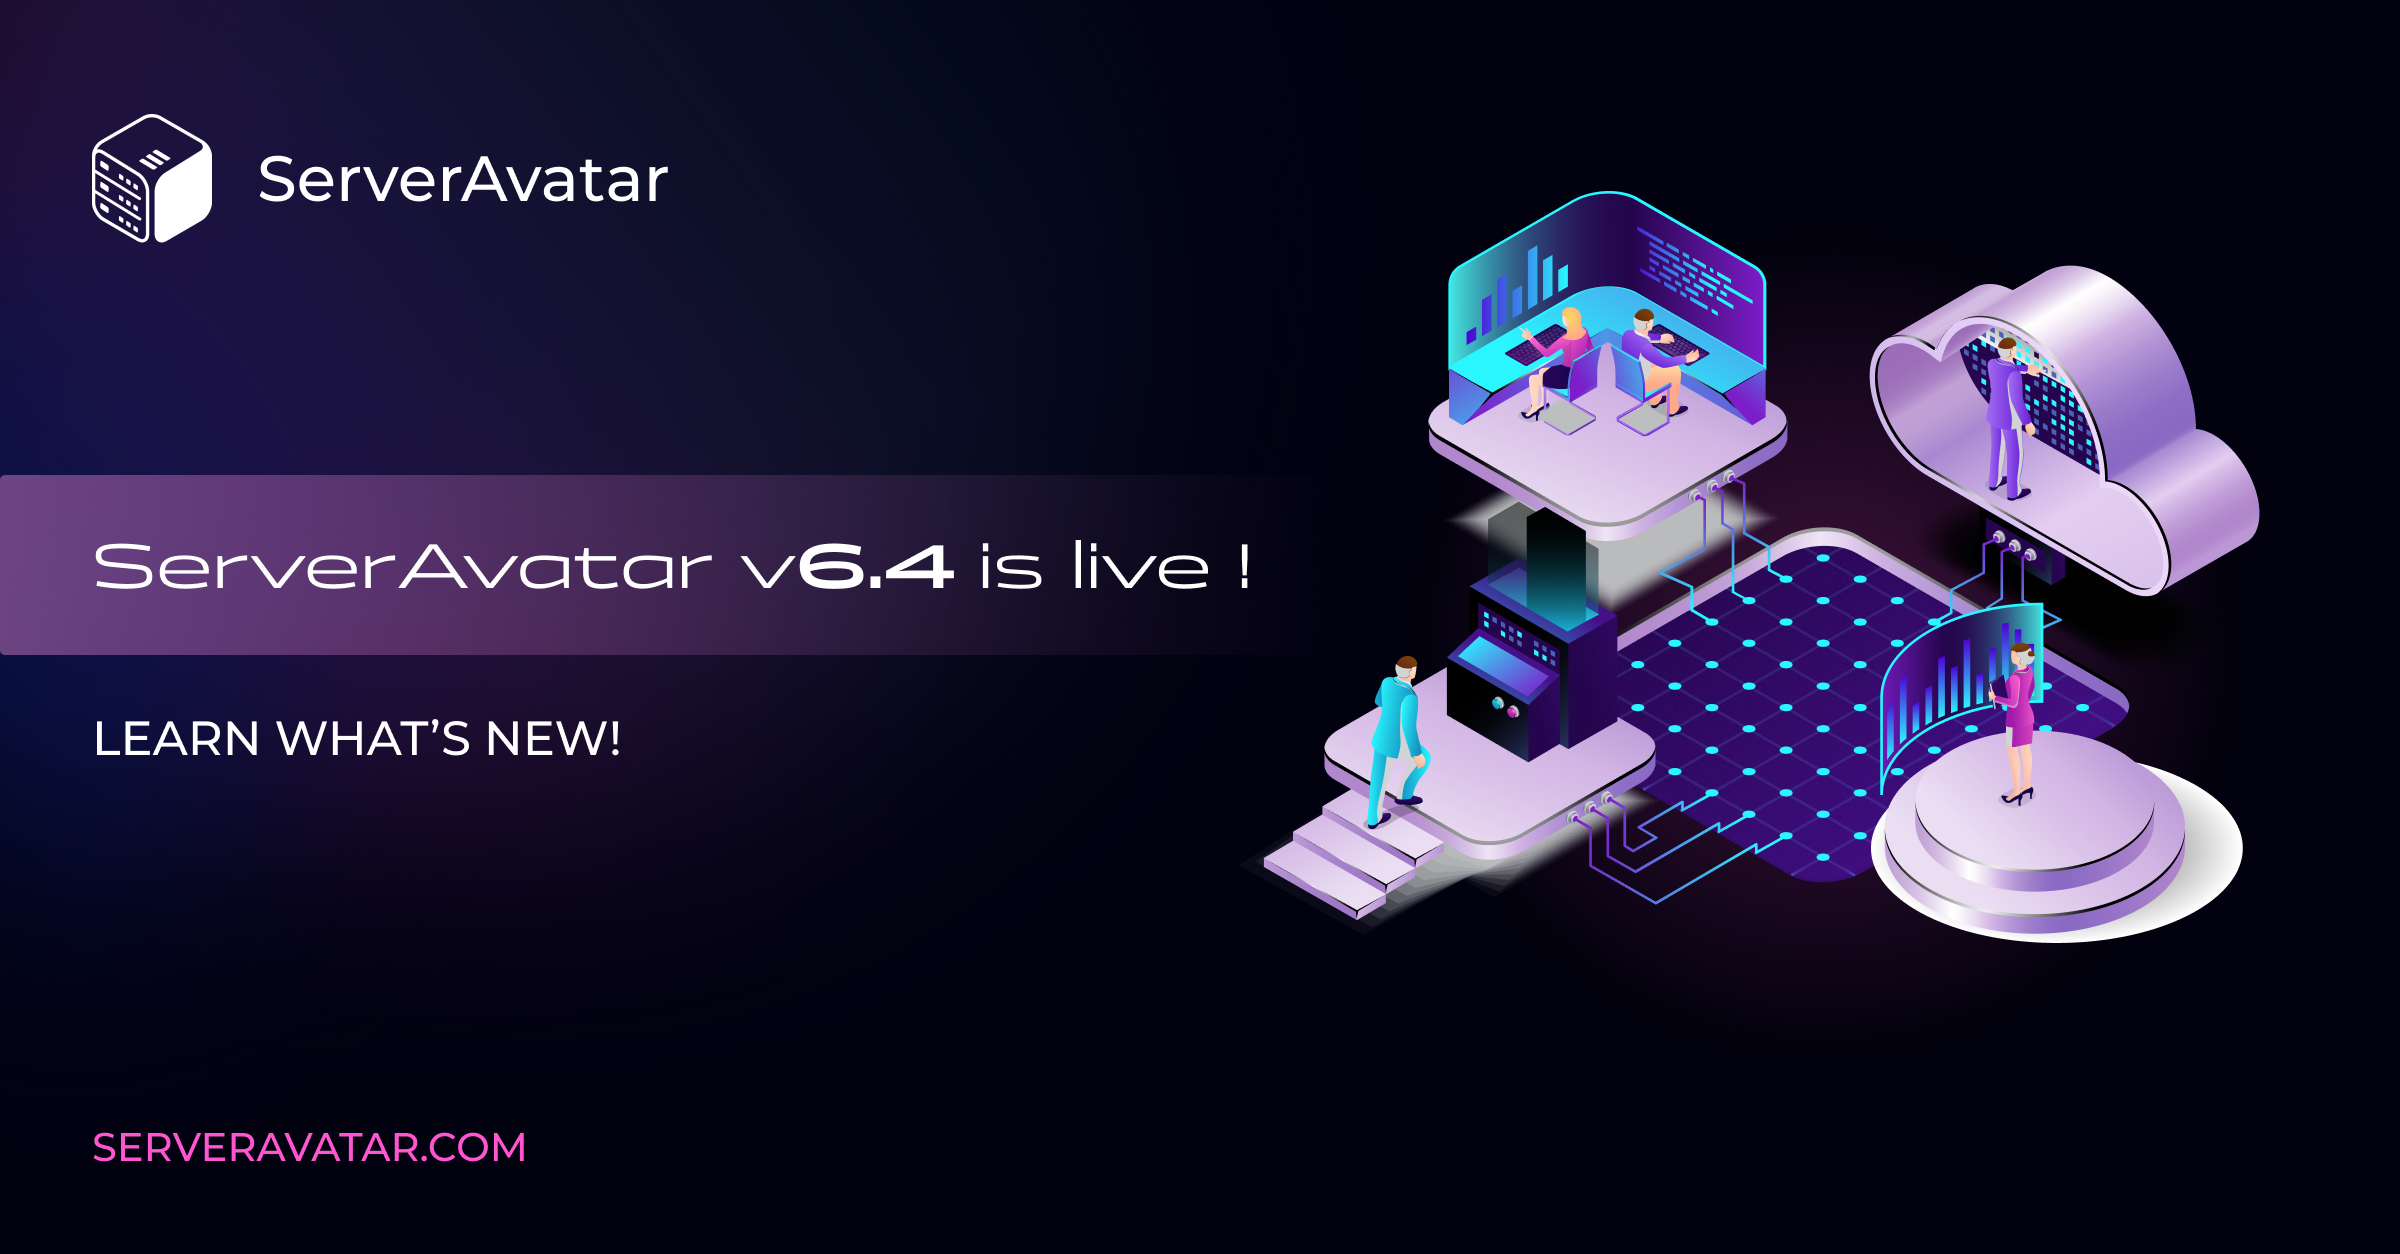 ServerAvatar v6.4 is Live! – Find out What’s New!